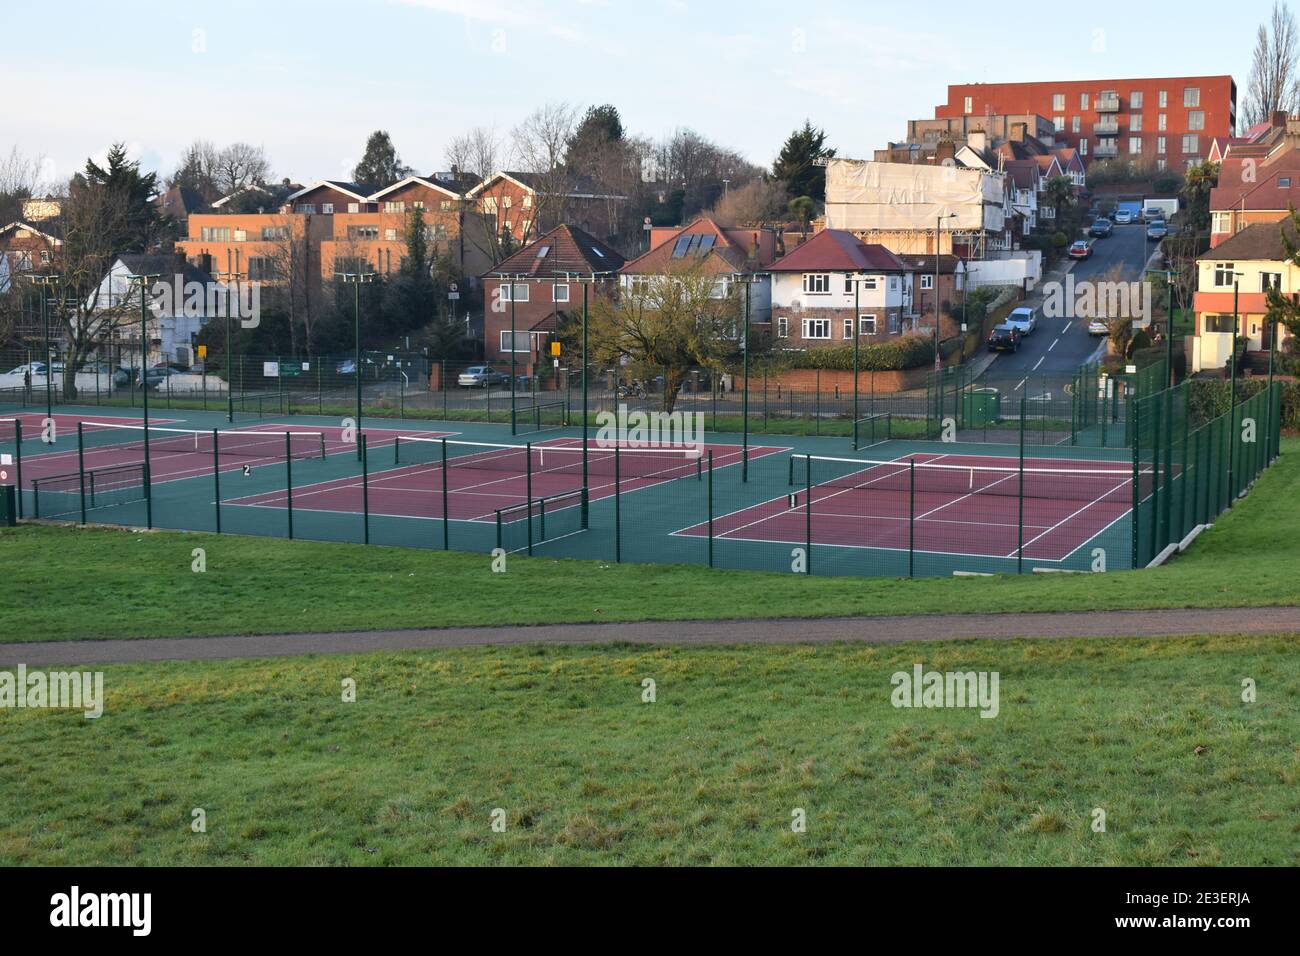 Outdoor macadam pay as you play tennis court. Hard courts are made of uniform rigid material covered with an acrylic surface layer for greater bounce. Stock Photo